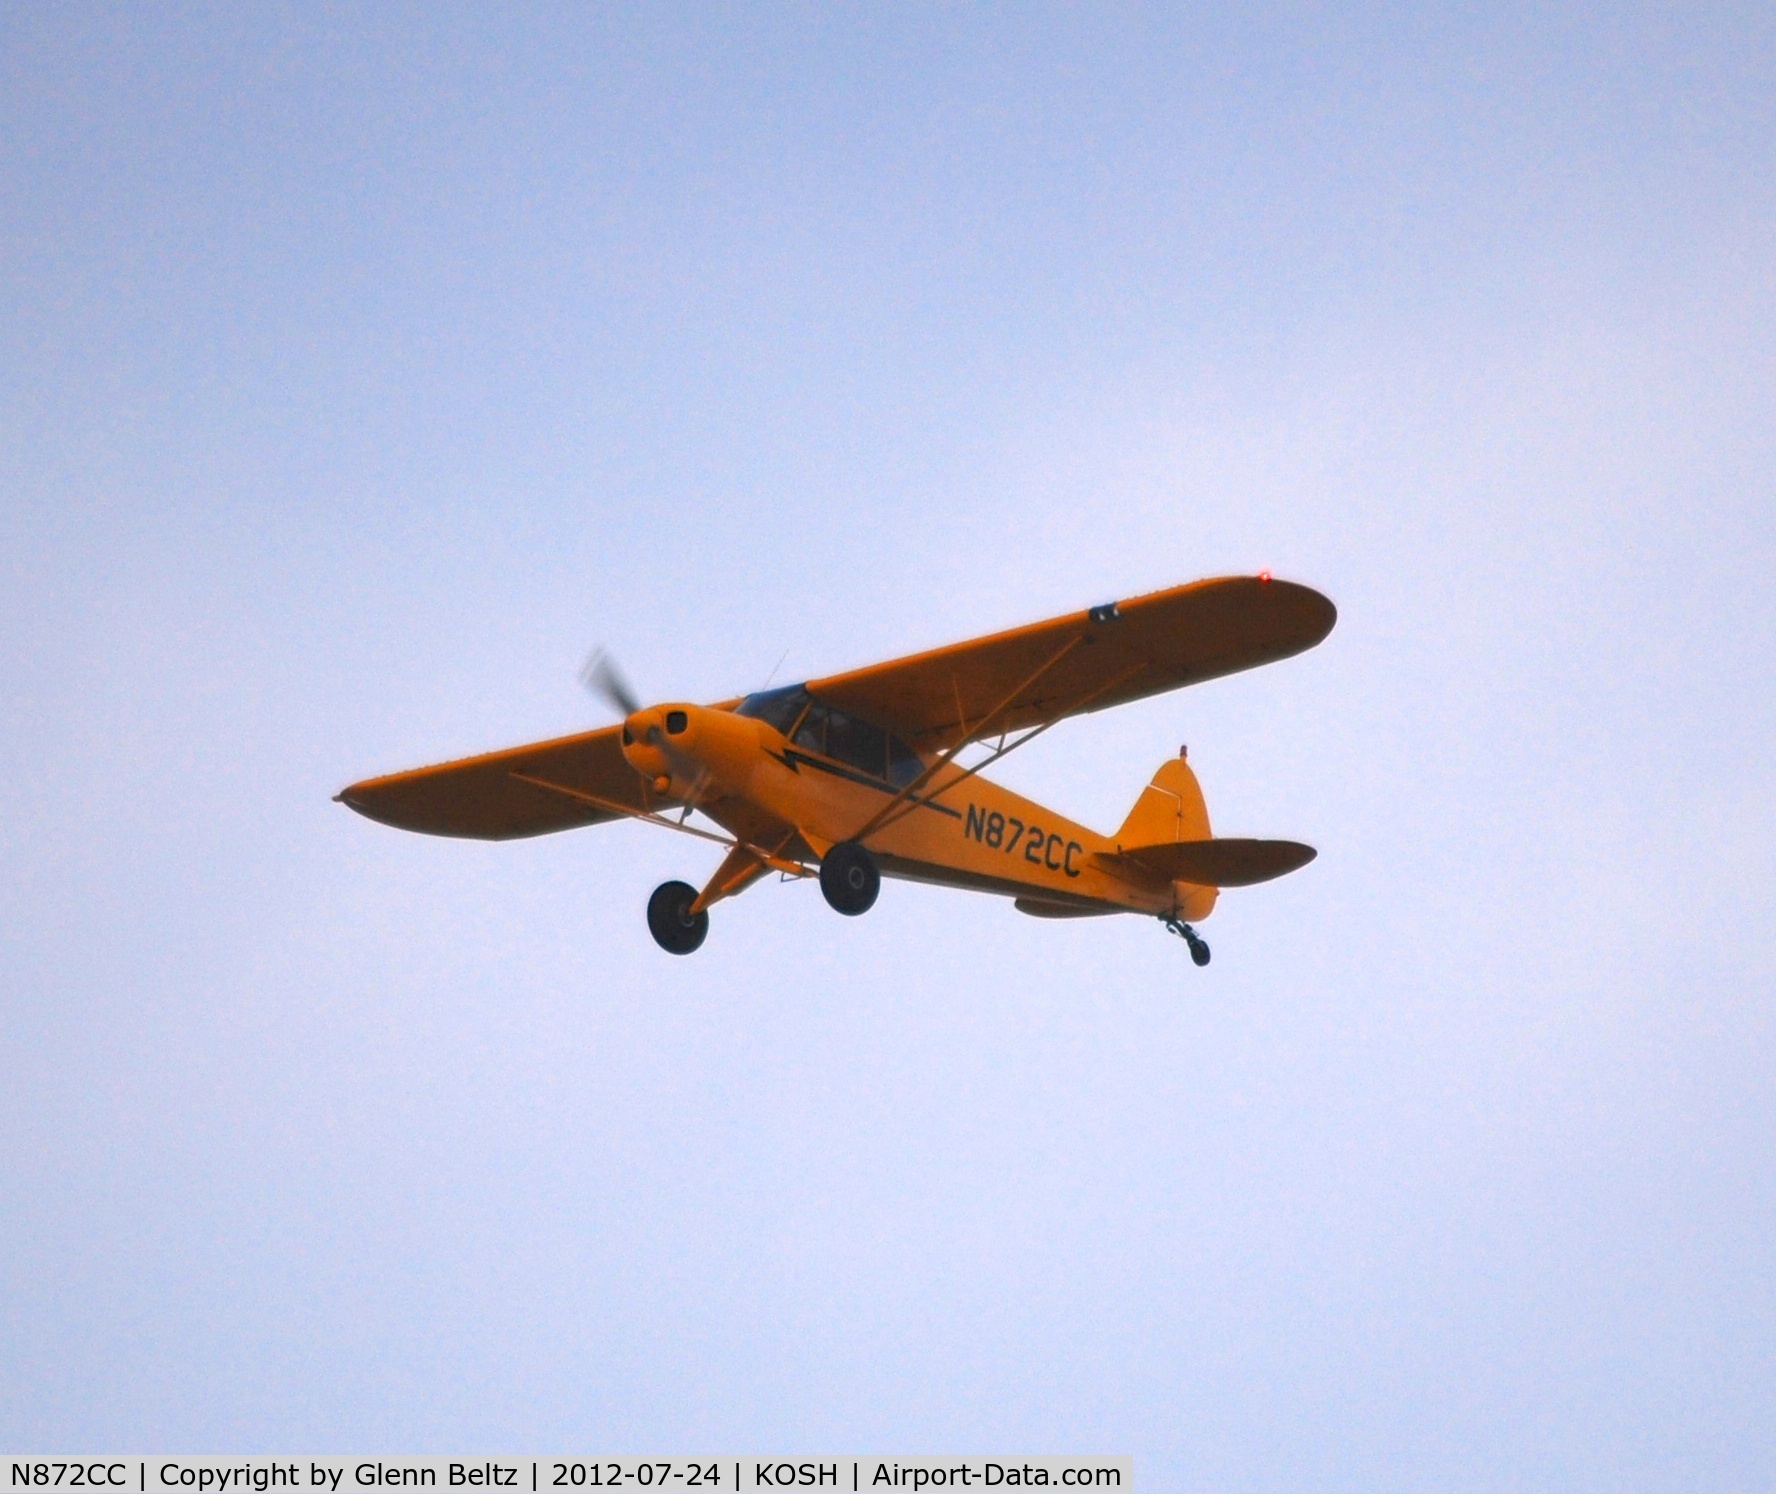 N872CC, 2001 Piper/cub Crafters PA-18-150 C/N 9929CC, Departing EAA Airventure/Oshkosh on 24 July 2012.